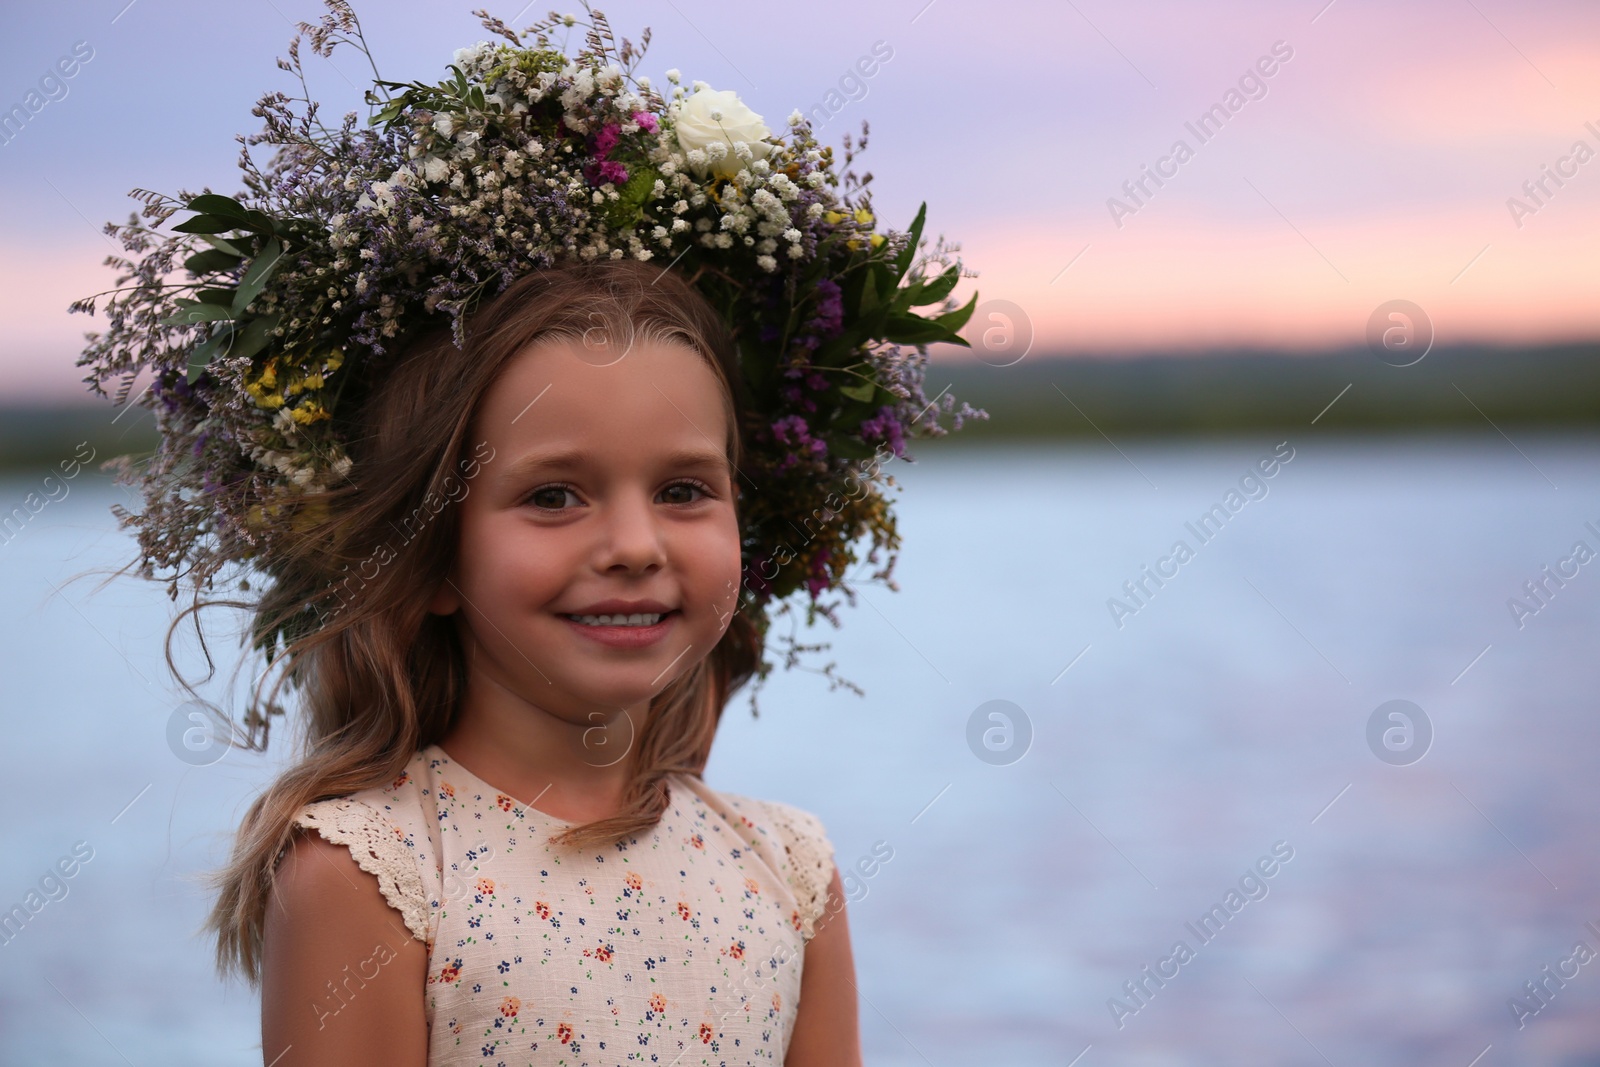 Photo of Cute little girl wearing wreath made of beautiful flowers near river at sunset